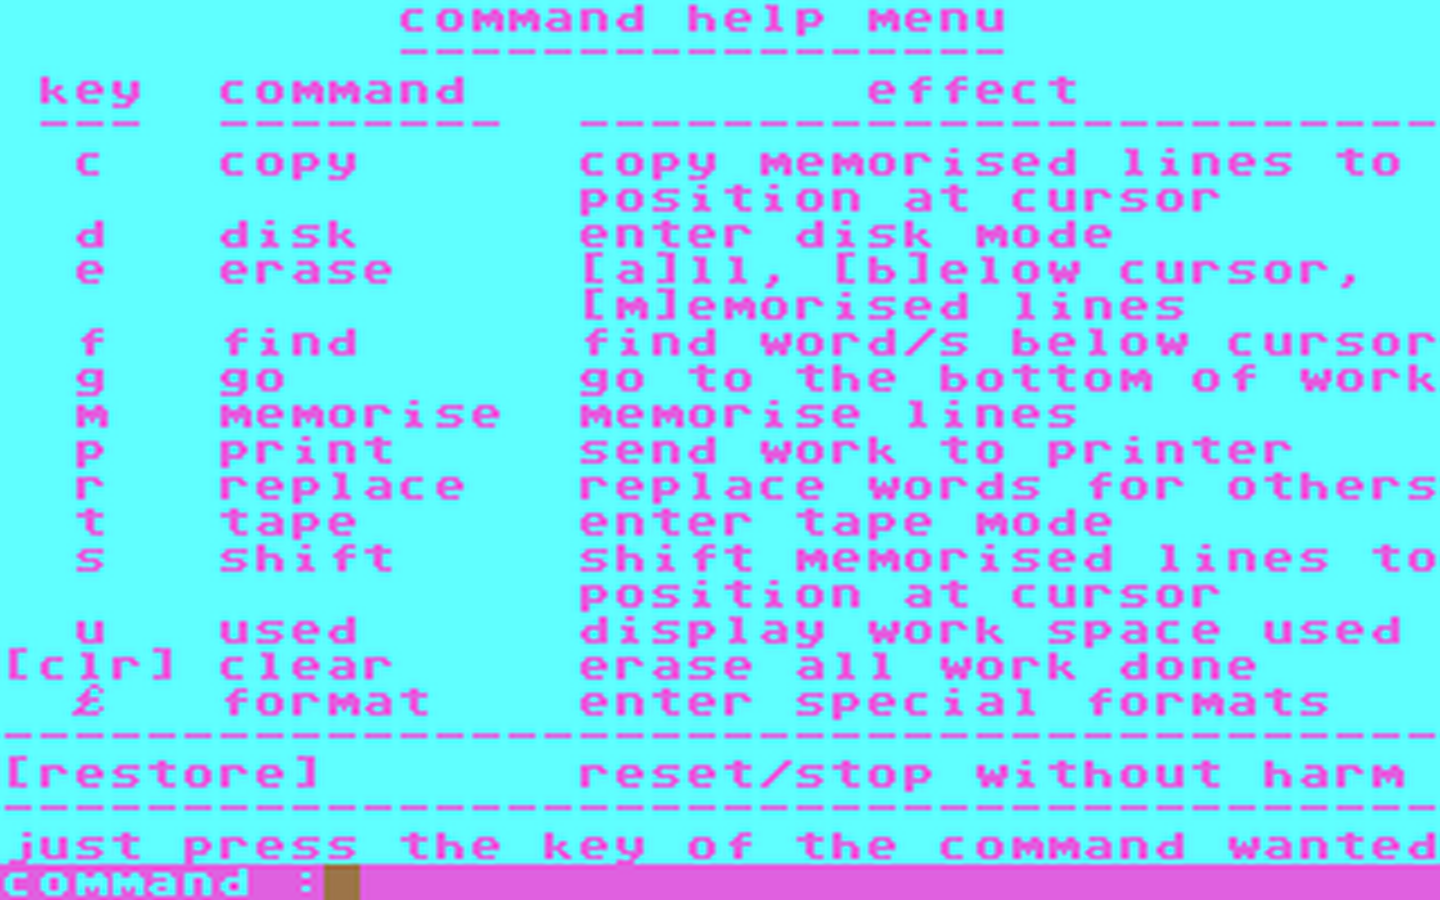 C64 GameBase Ladders_to_Learning_-_Write_Now McGraw-Hill_Ryerson_Ltd. 1984